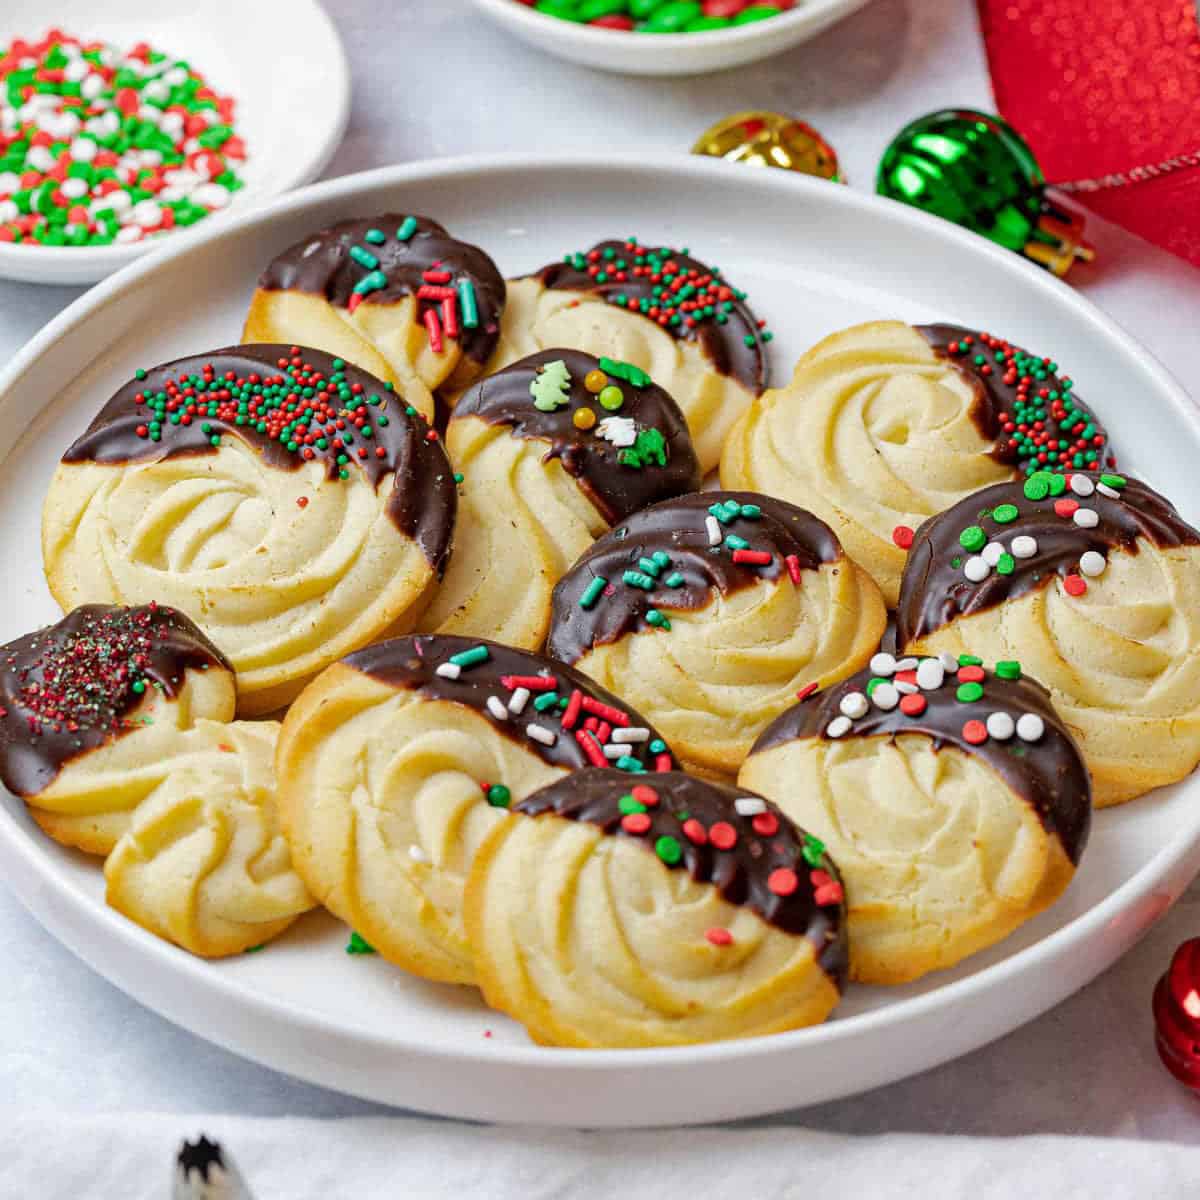 A plate of Christmas cookies dipped in chocolate.